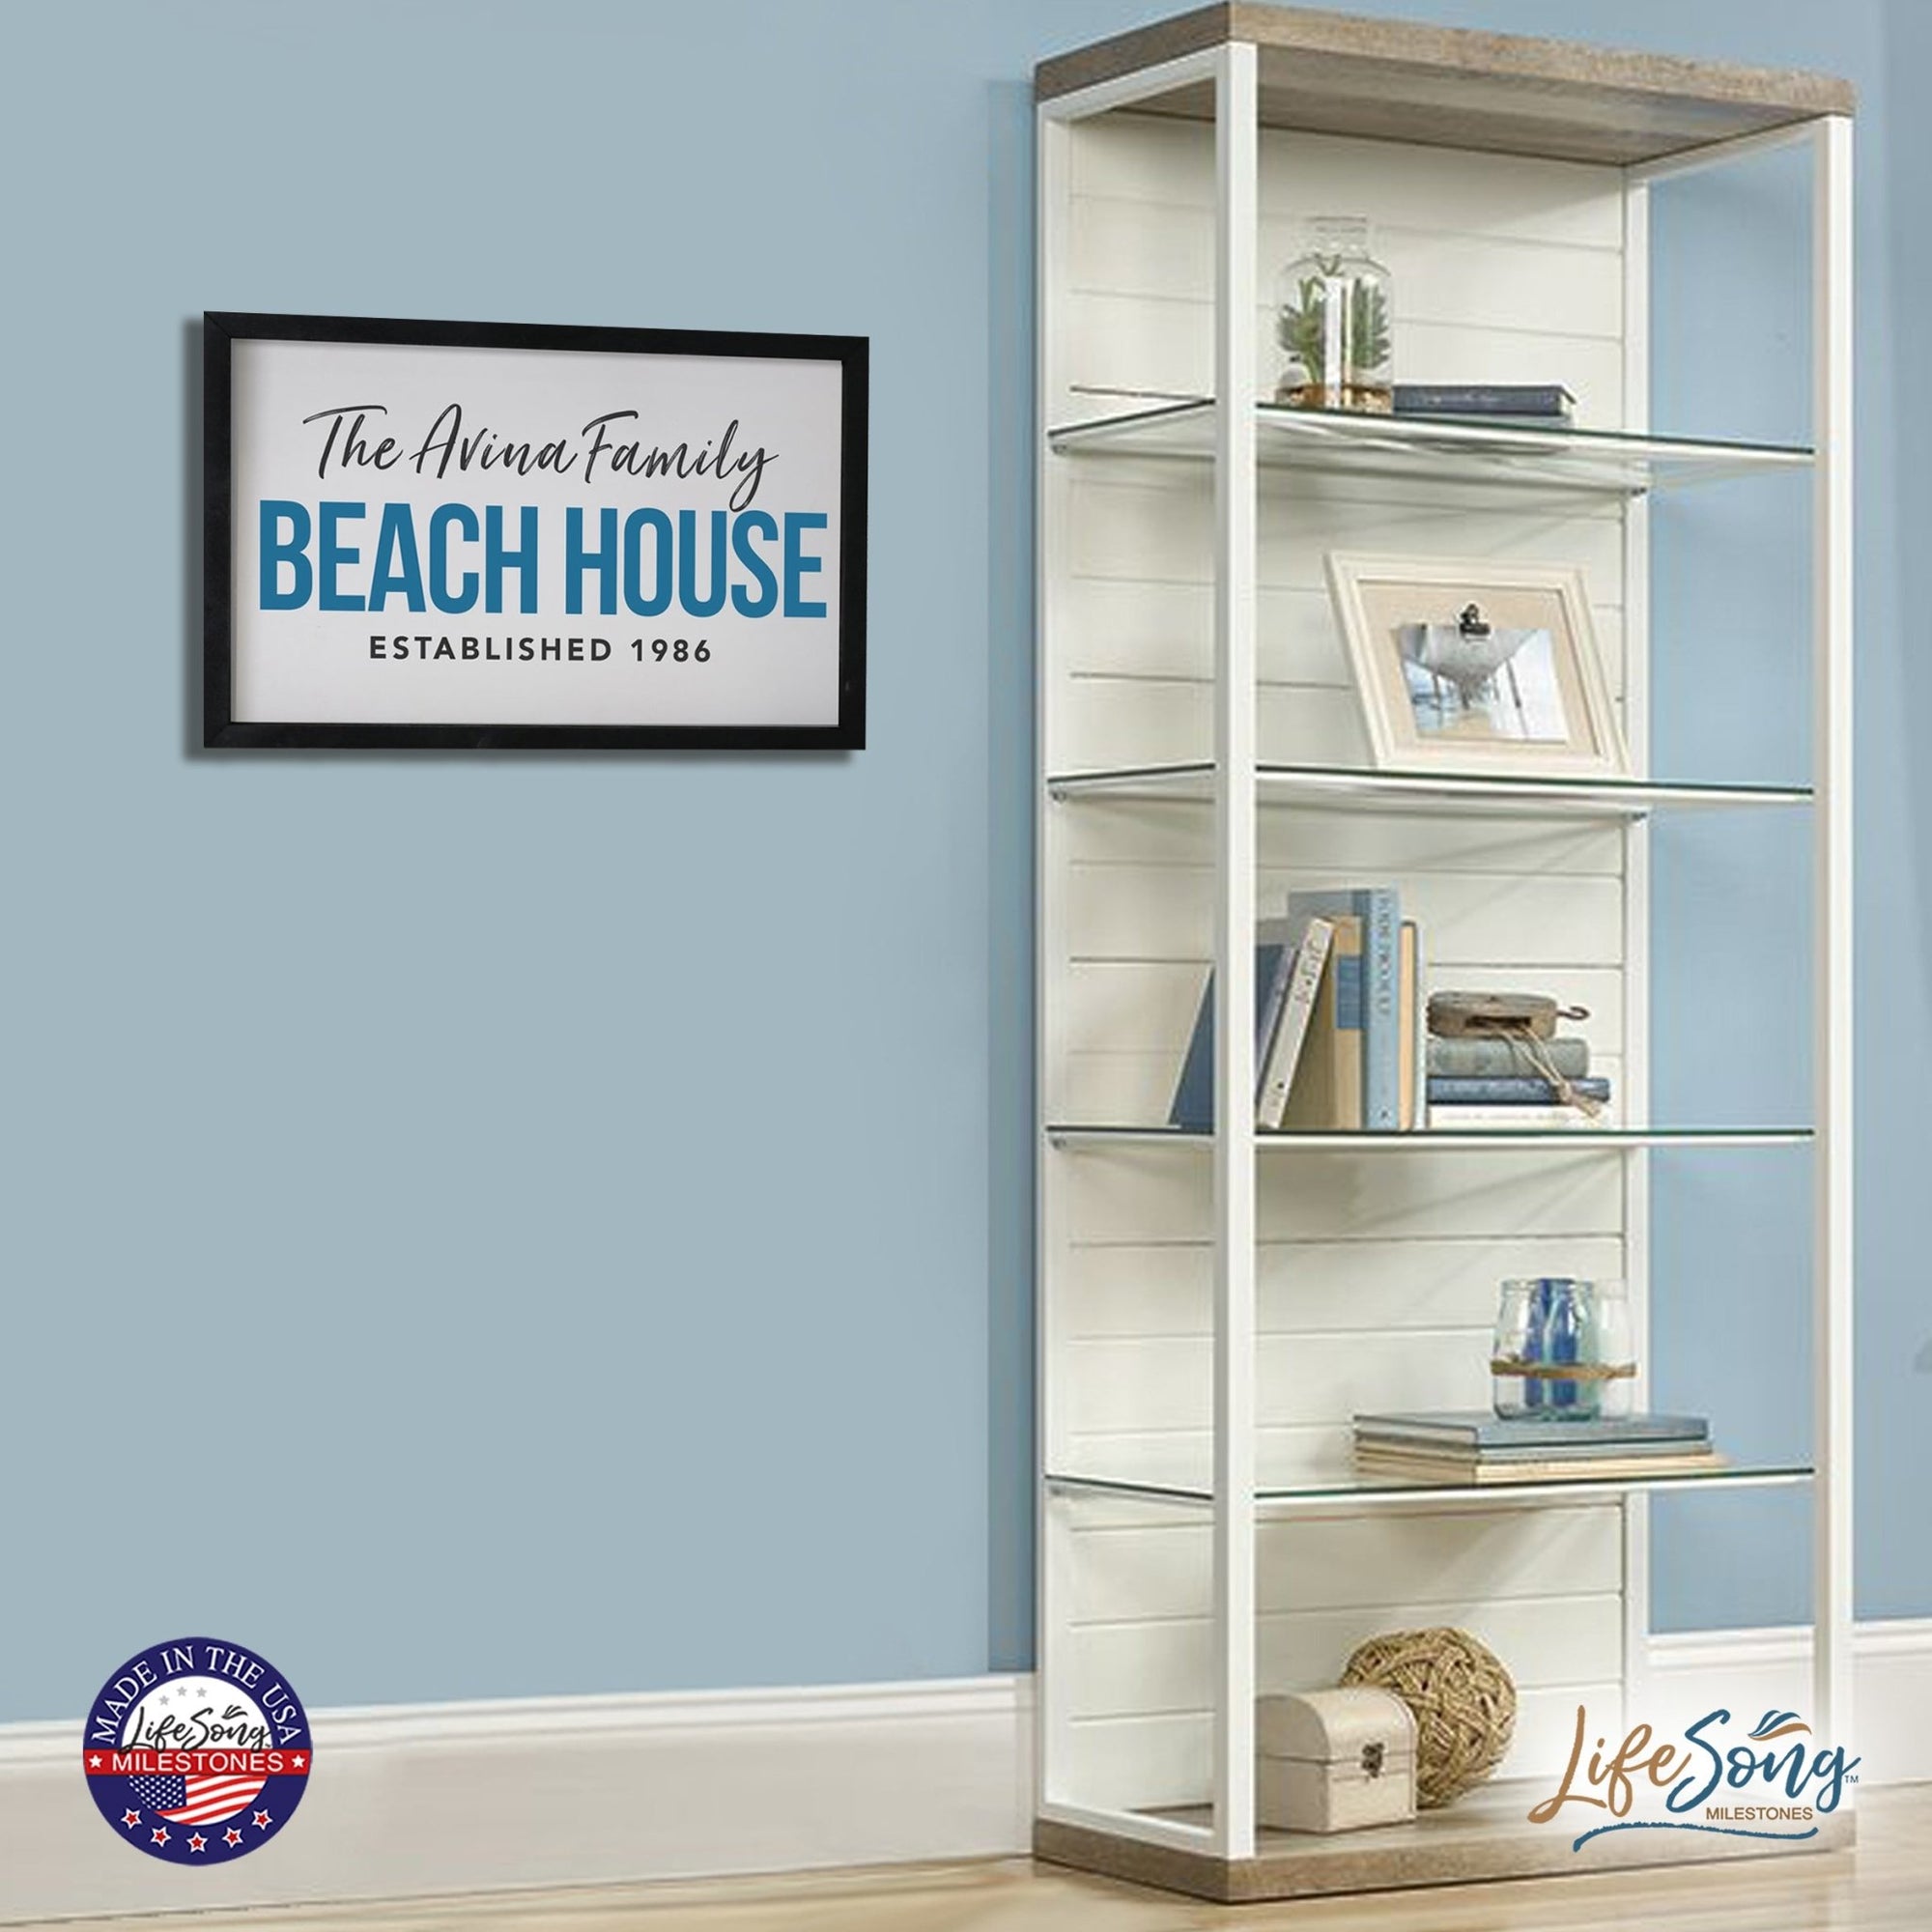 Inspirational Personalized Framed Shadow Box 16x25 - Beach House (Established) - LifeSong Milestones